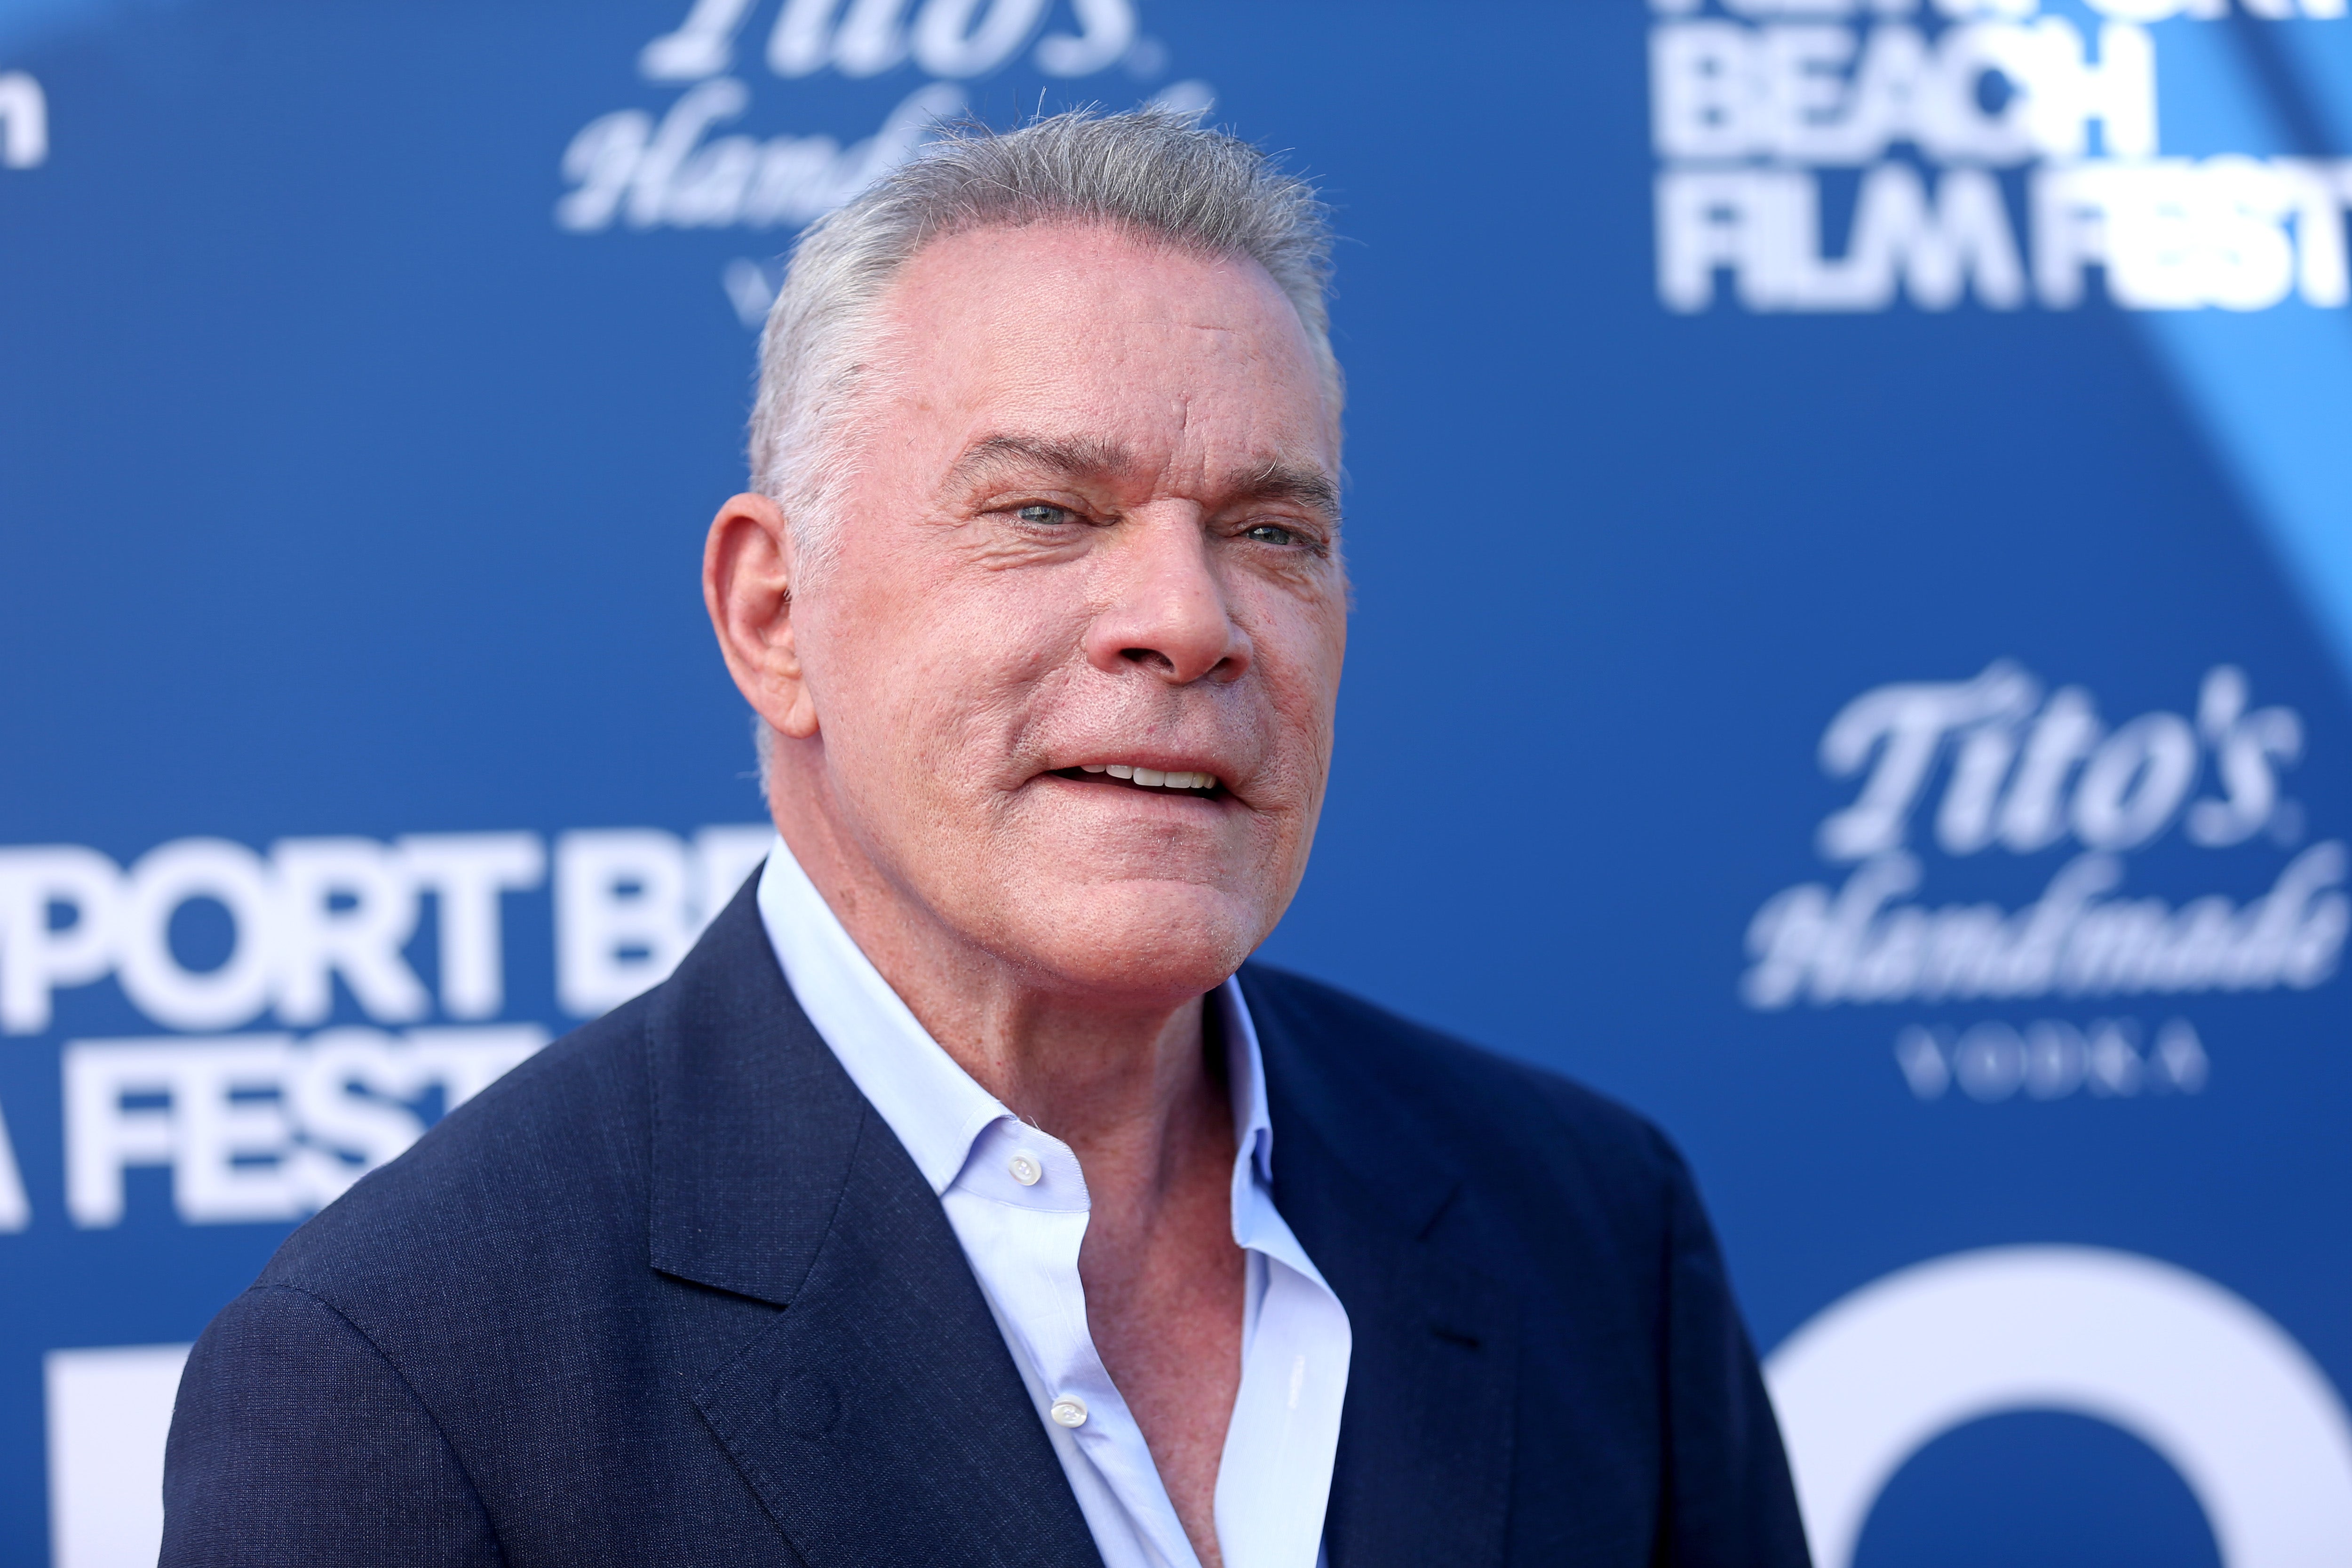 Ray Liotta remembered by his ‘Goodfellas’ co-stars and Hollywood peers: ‘God is a Goodfella’